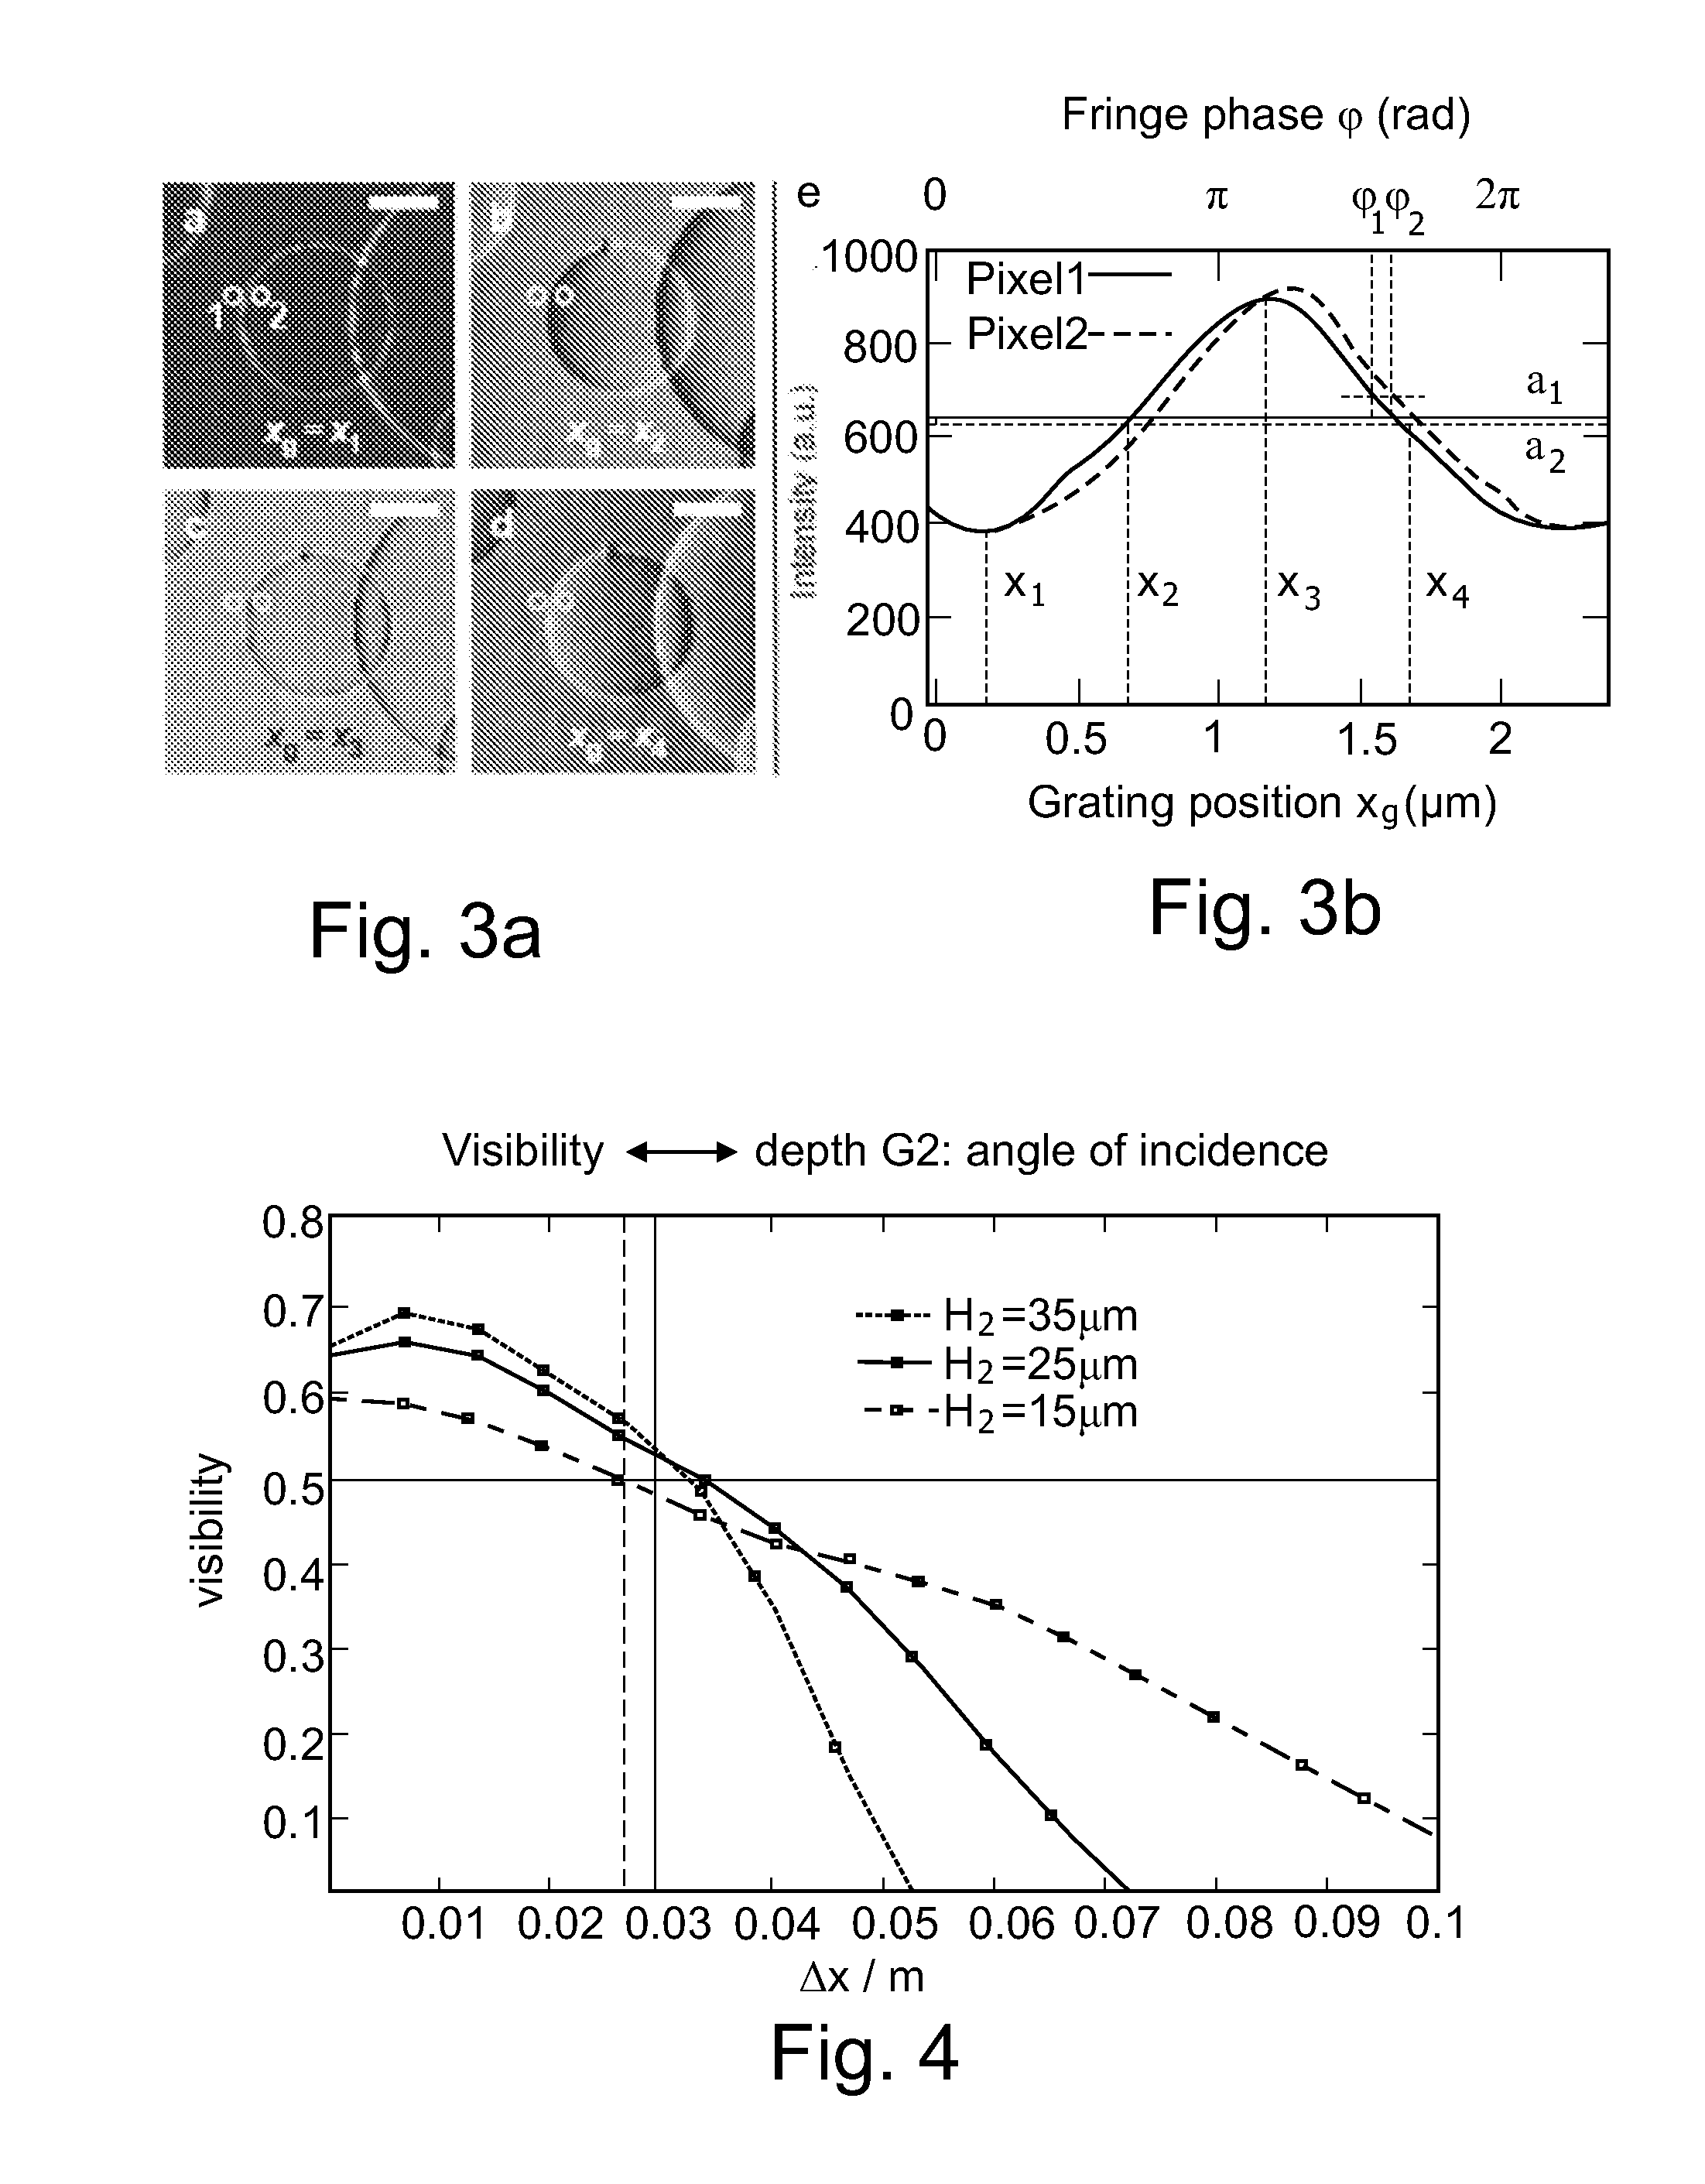 Non-parallel grating arrangement with on-the-fly phase stepping, x-ray system